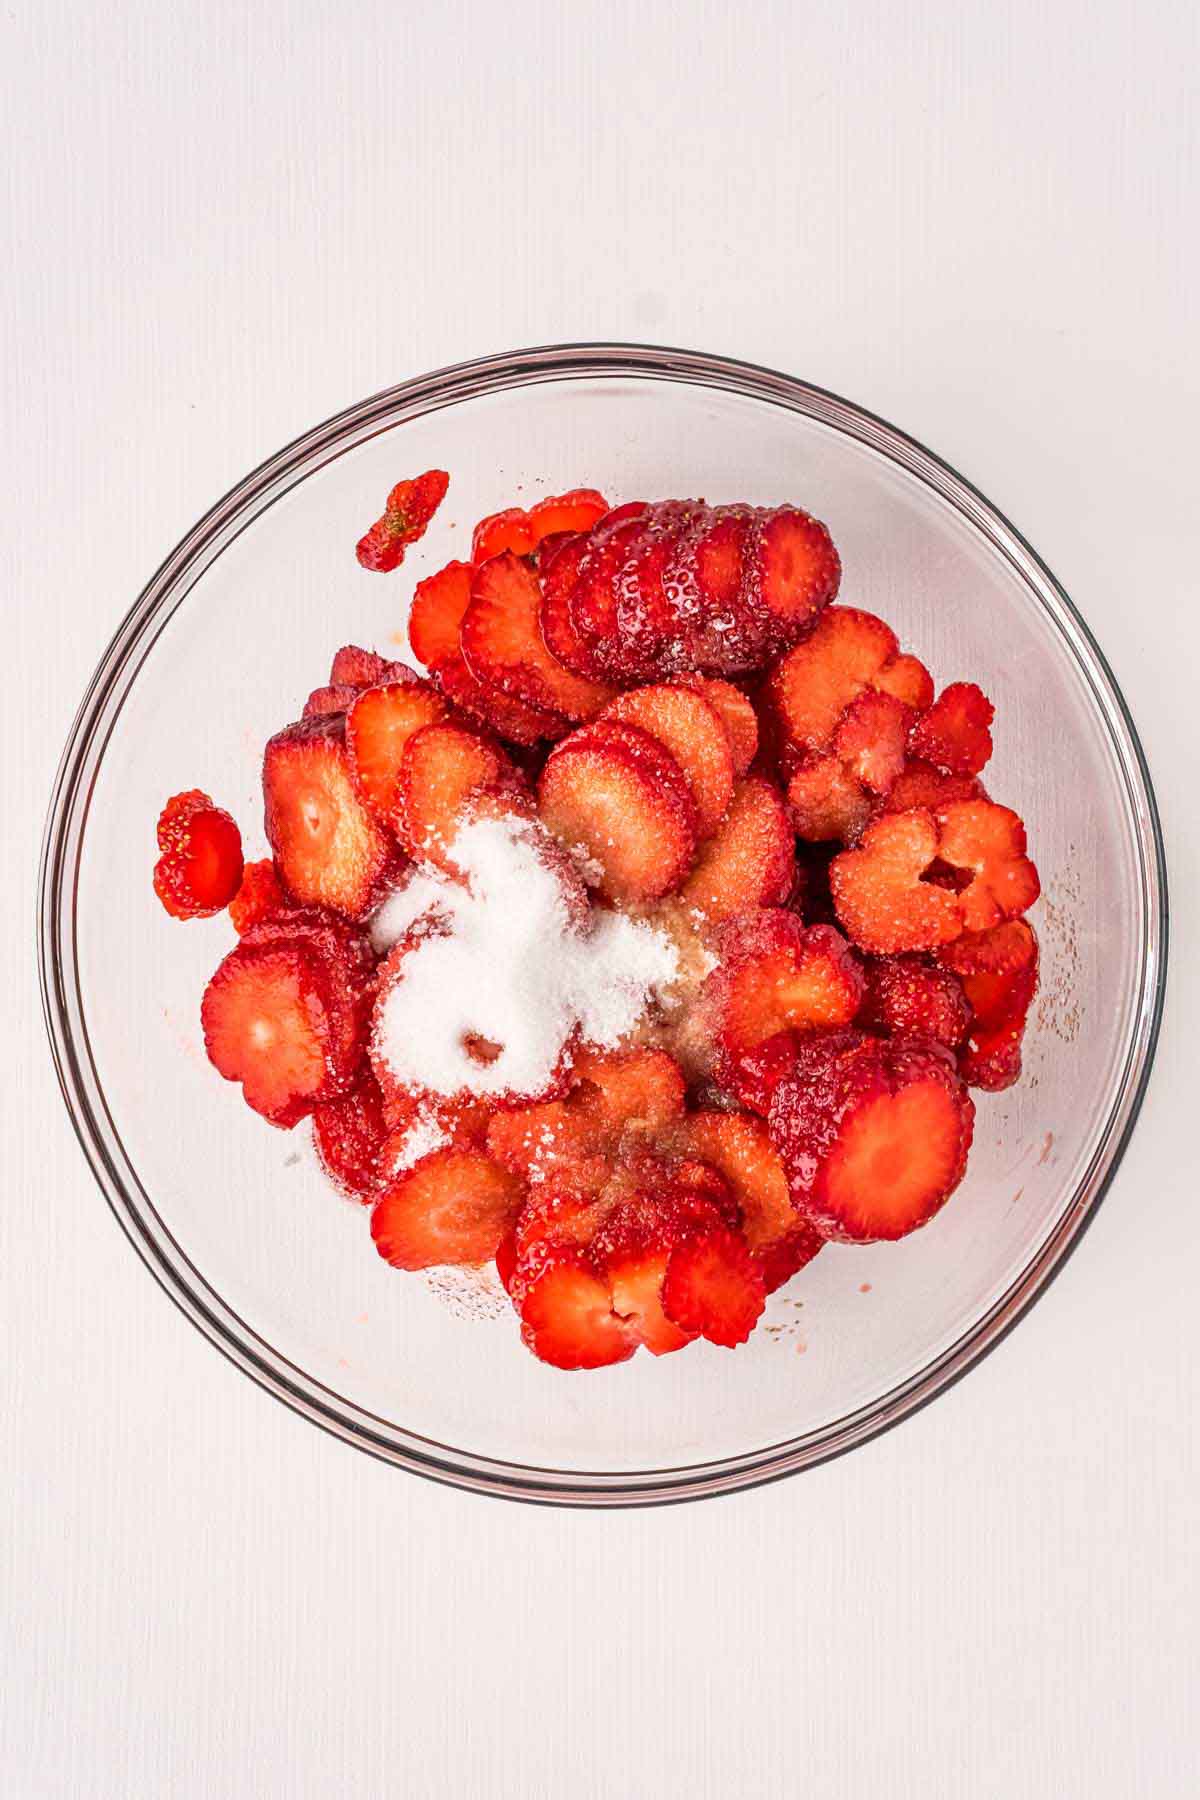 chopped strawberries in a glass bowl